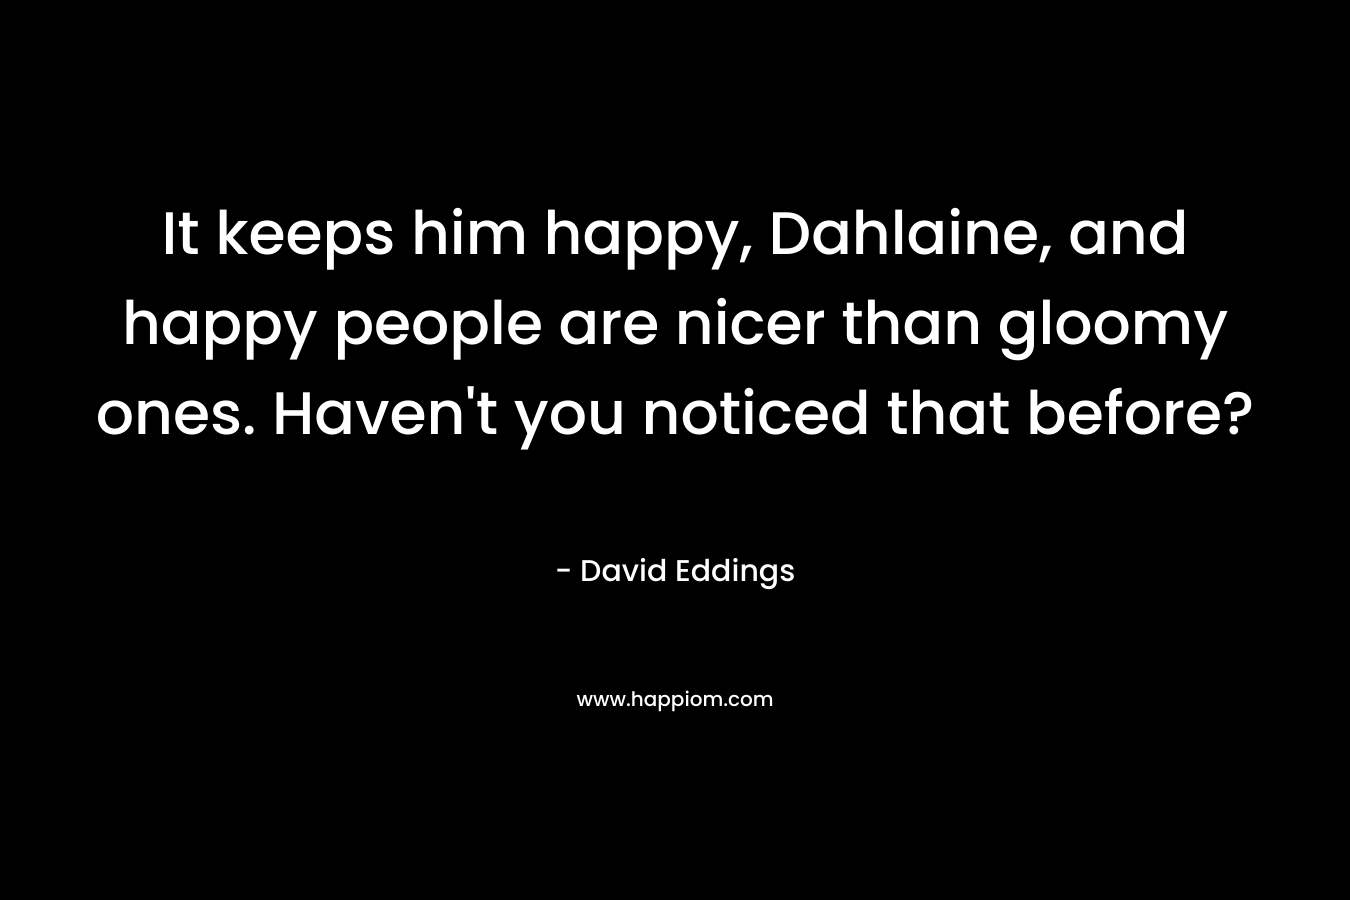 It keeps him happy, Dahlaine, and happy people are nicer than gloomy ones. Haven’t you noticed that before? – David Eddings